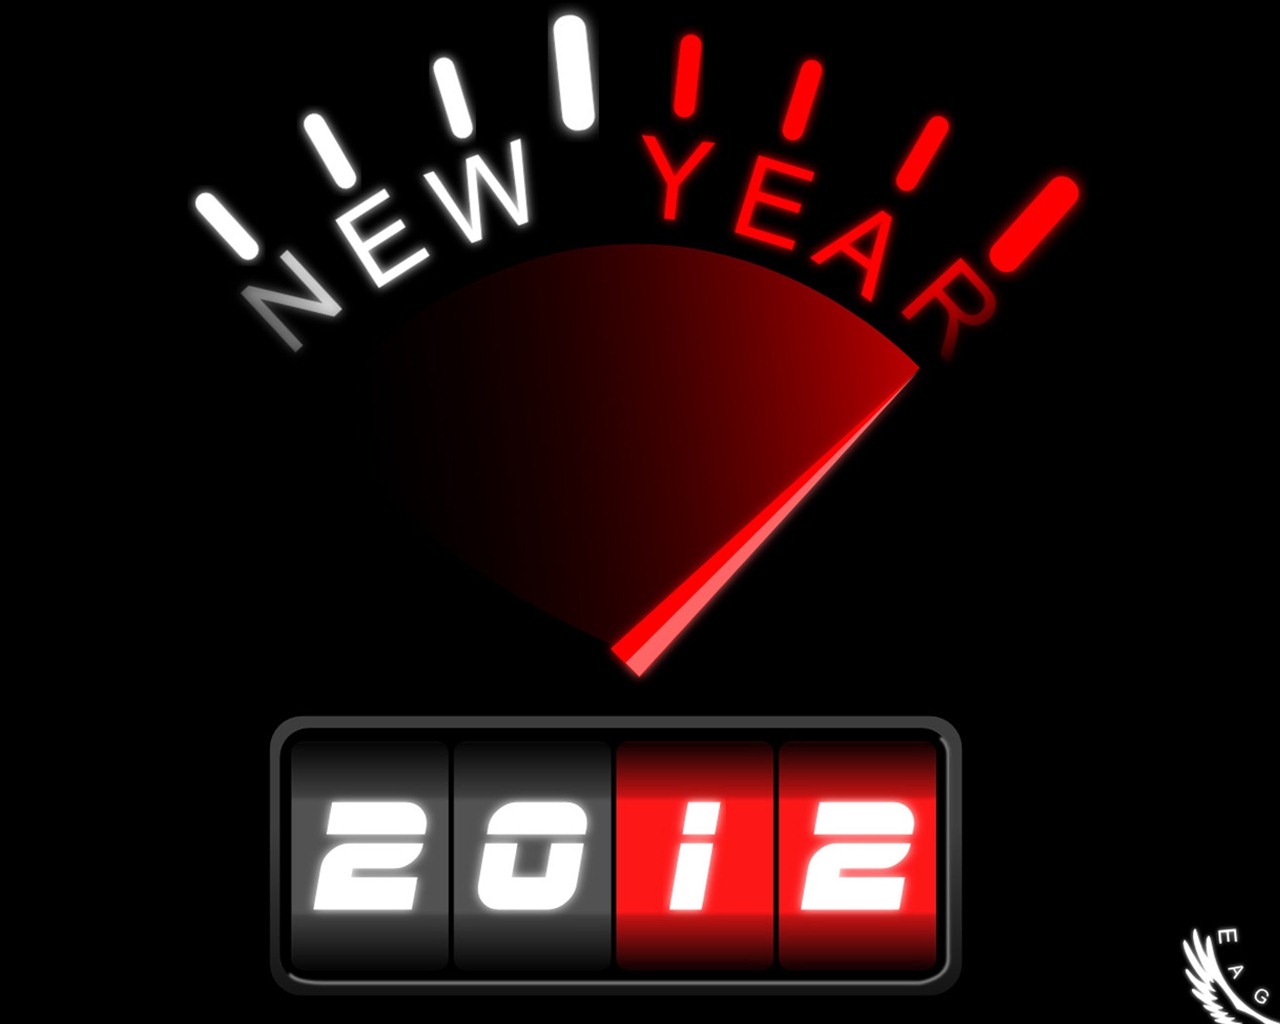 2012 New Year wallpapers (2) #7 - 1280x1024